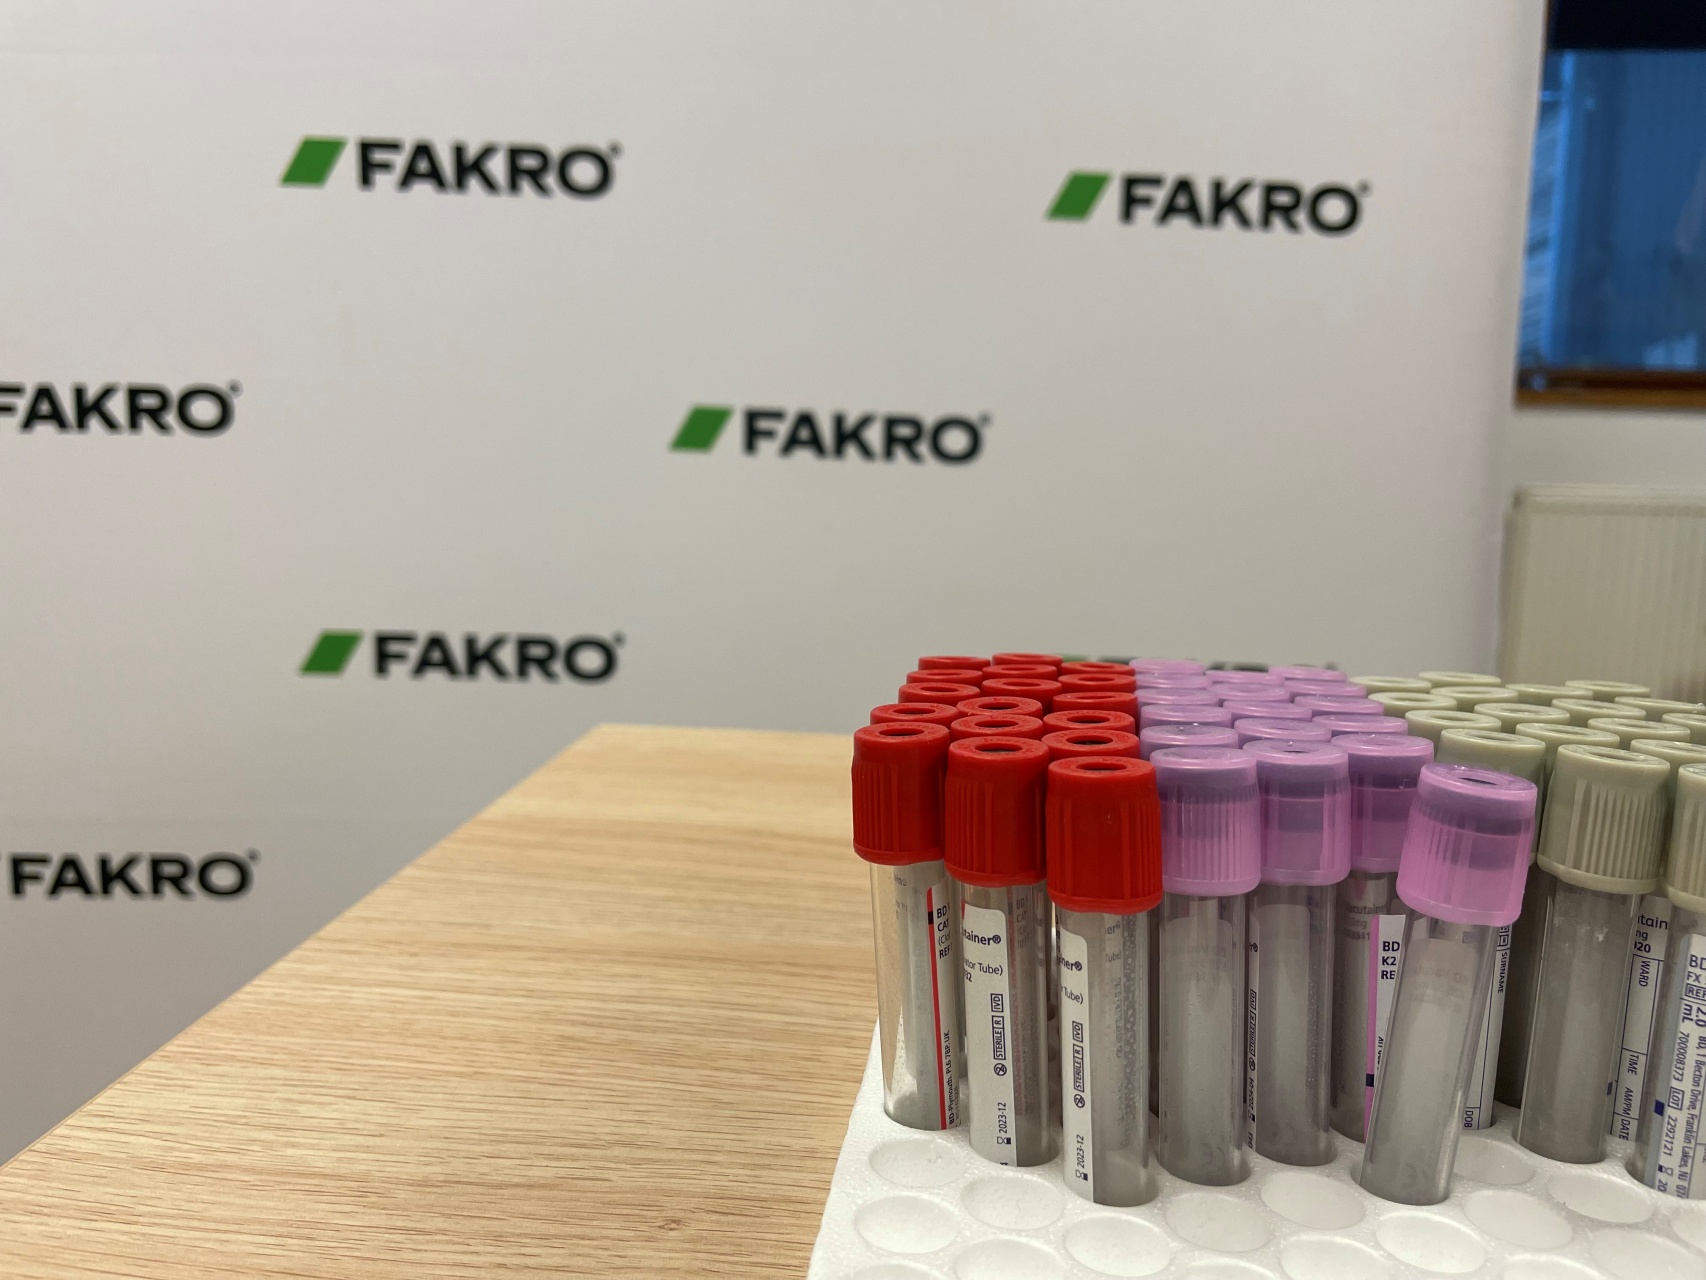 Over 250 FAKRO employees tested for free at the company\'s headquarters